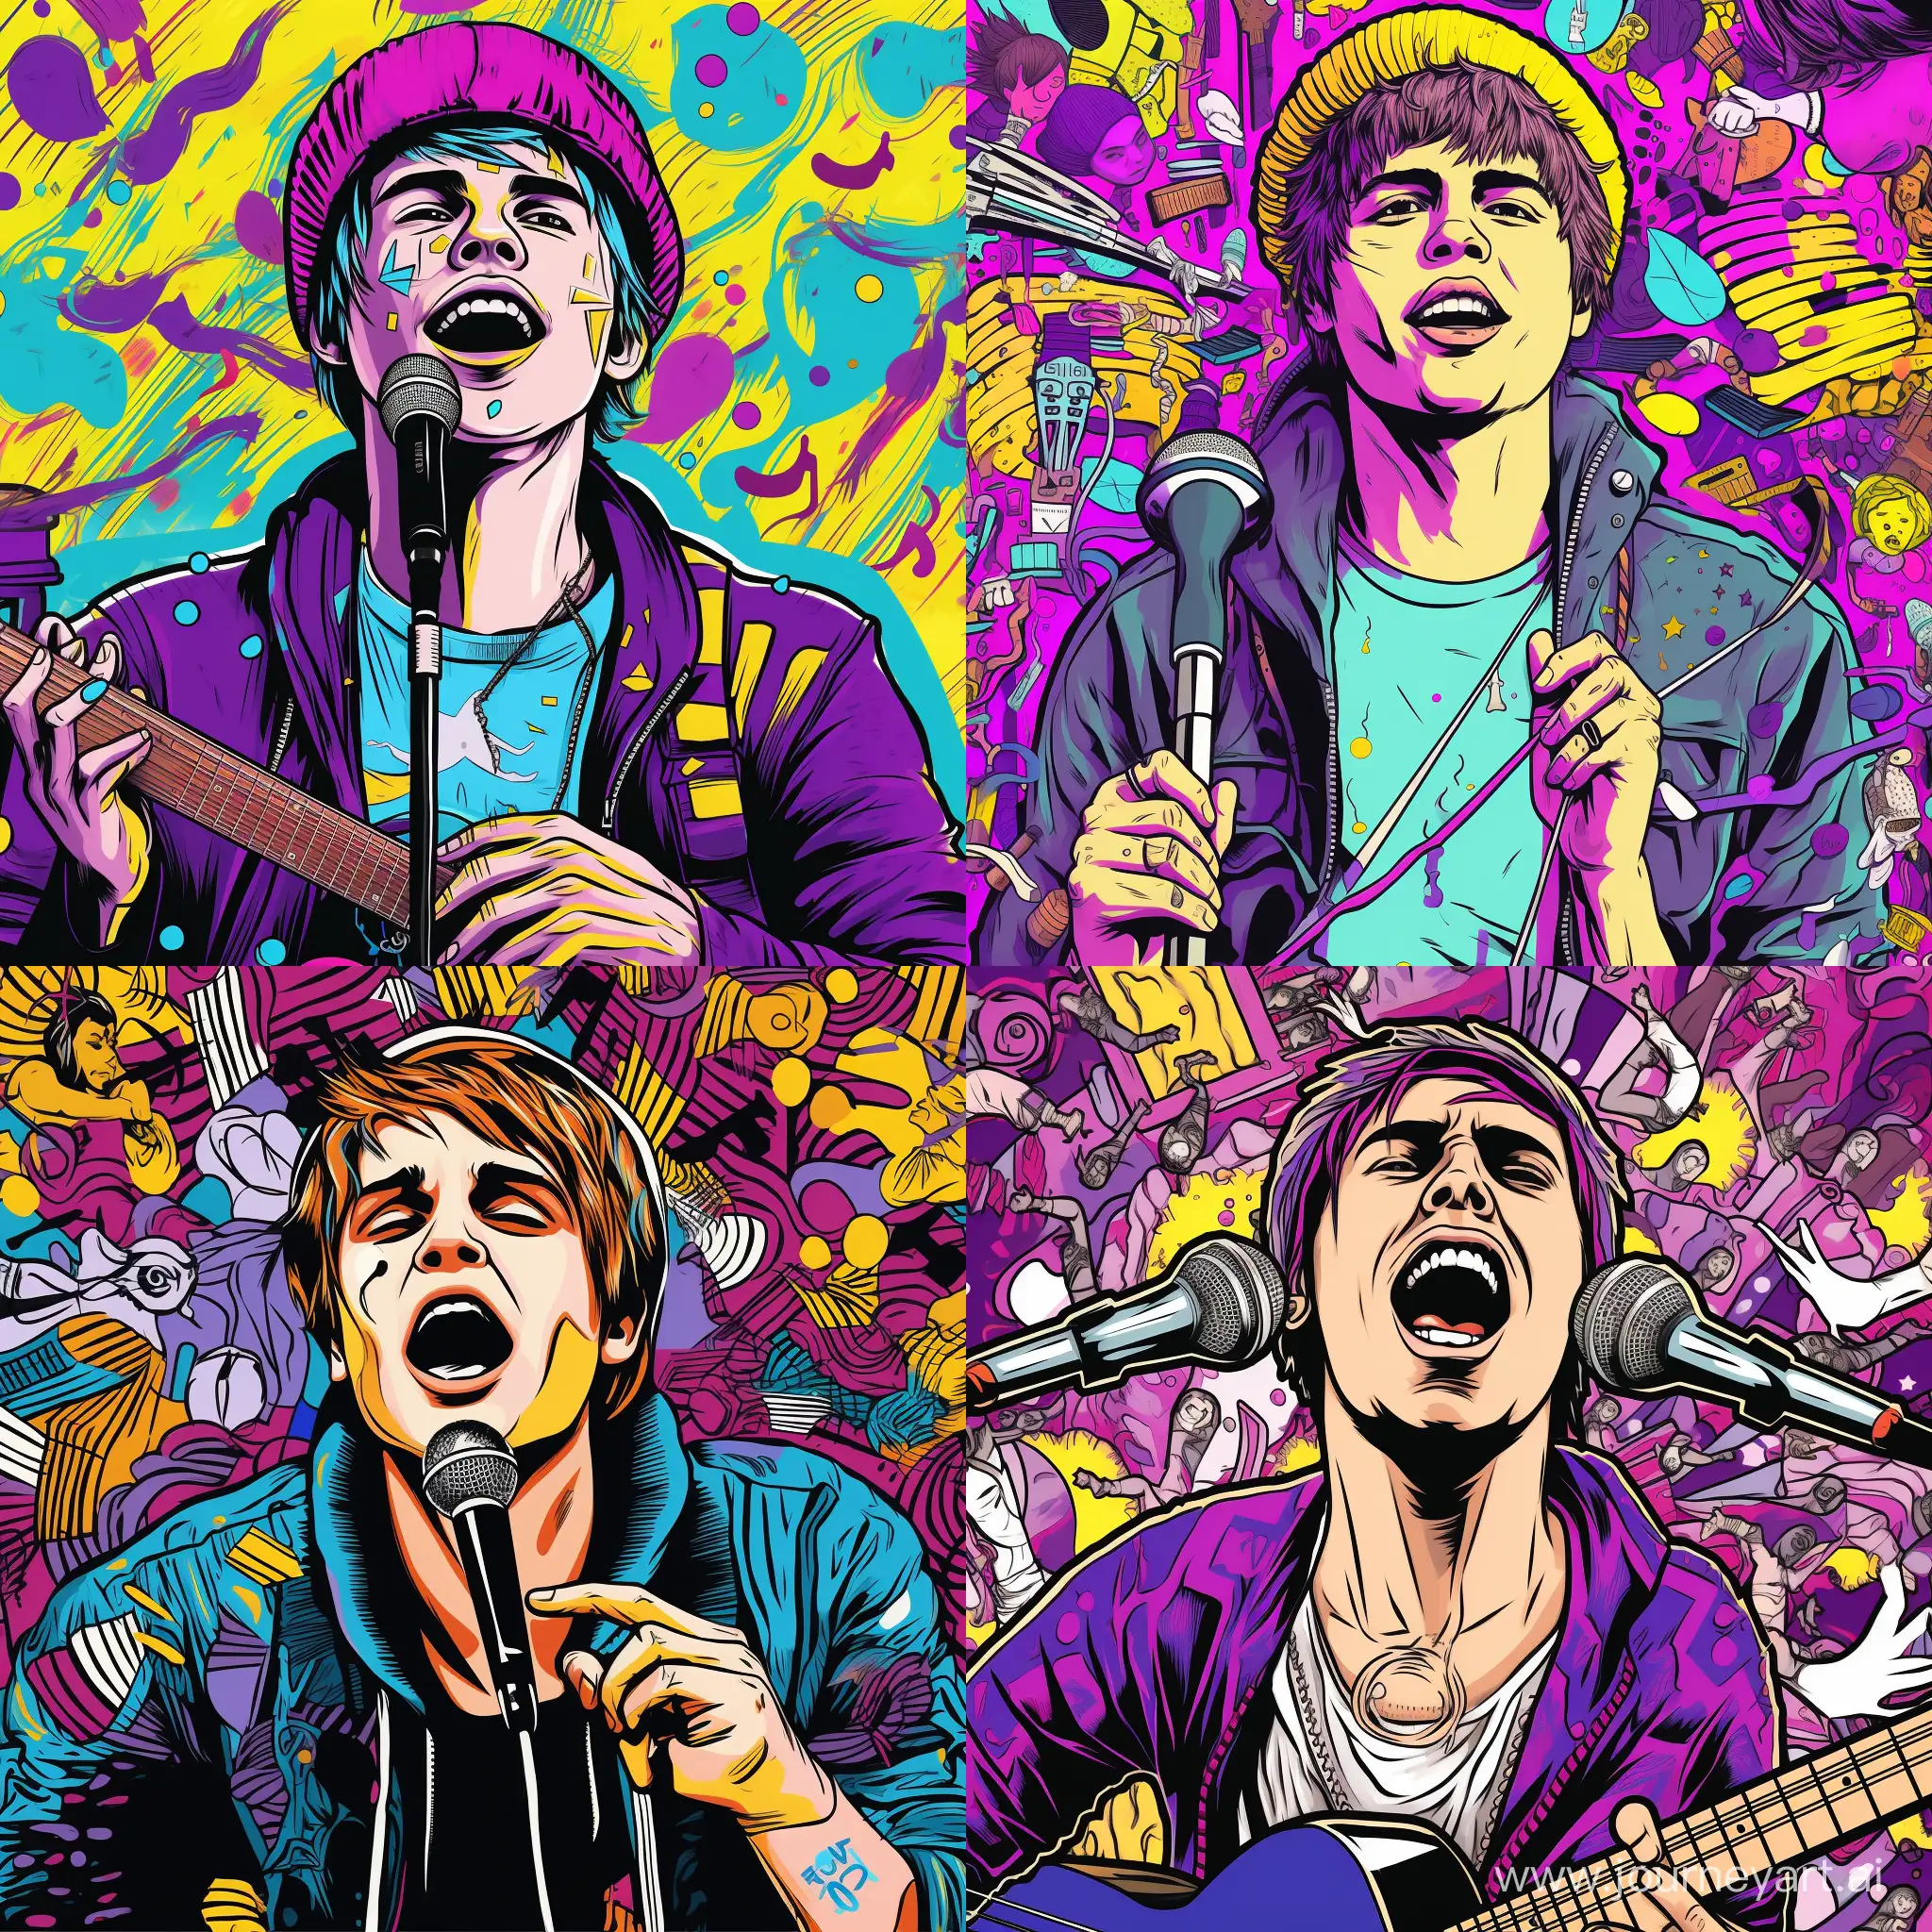 waist-length portrait of  Justin Bieber singing, surrounded by musical symbols, lots of details, complex very light color, caricature, pop art style